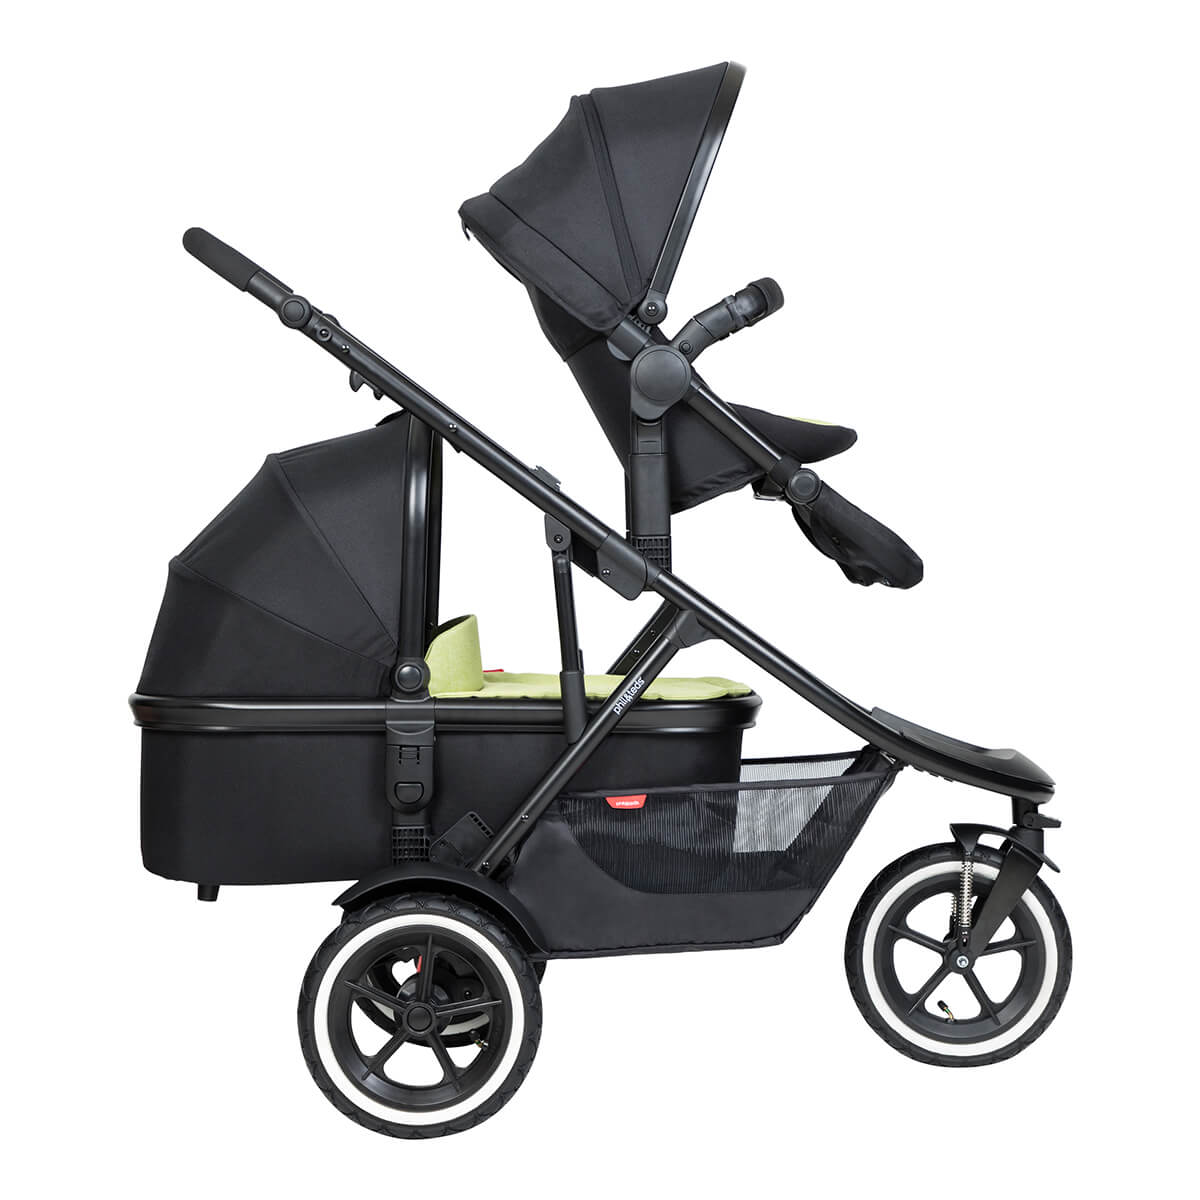 https://cdn.accentuate.io/7921432133810/19437753499826/philteds-sport-buggy-with-double-kit-extended-clip-and-snug-carrycot-side-view-v1706737895534.jpg?1200x1200